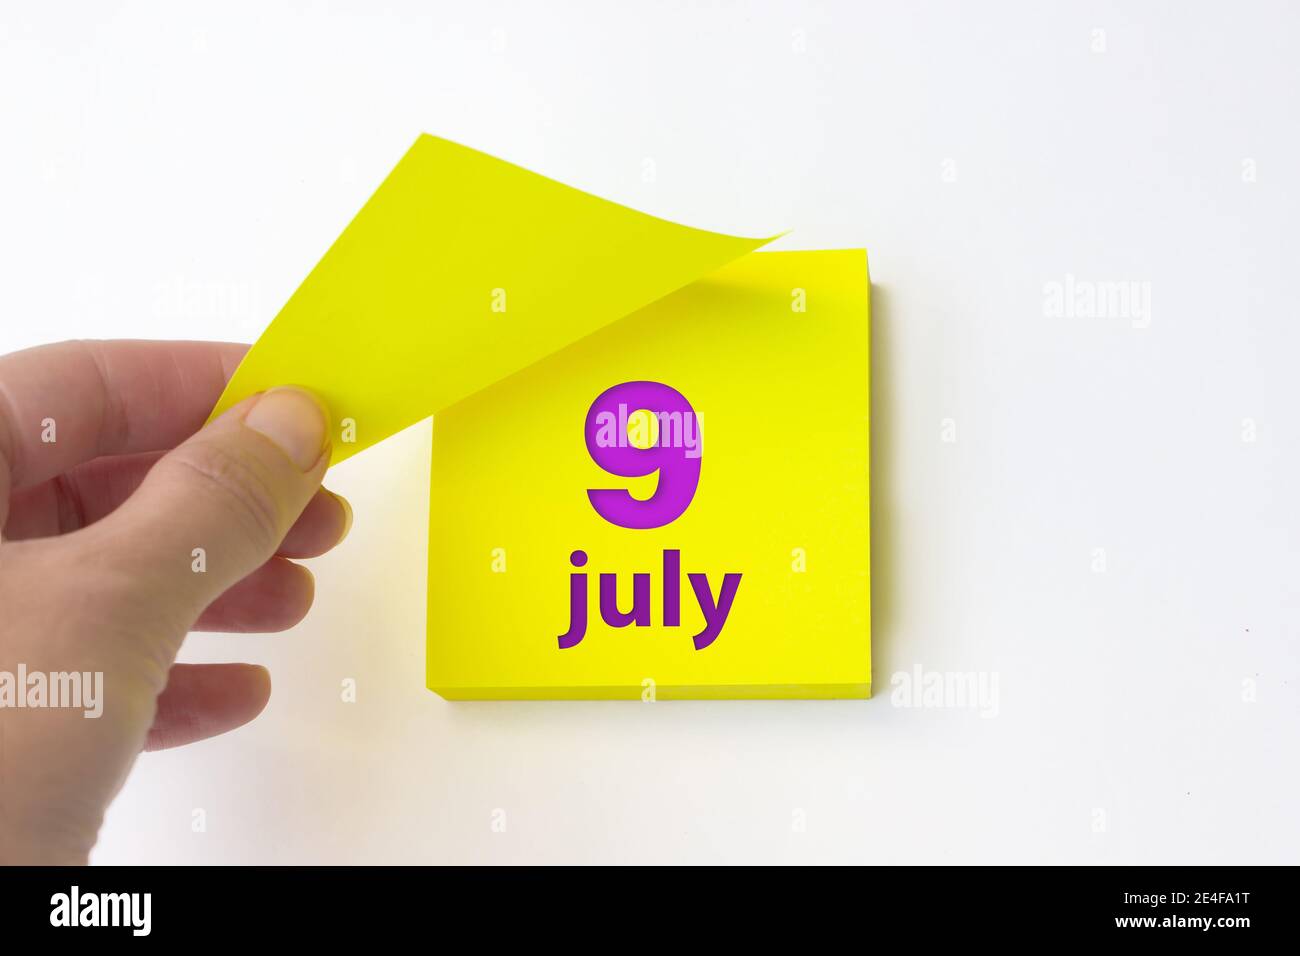 July 9th. Day 9 of month, Calendar date. Hand rips off the yellow sheet of the calendar. Summer month, day of the year concept Stock Photo